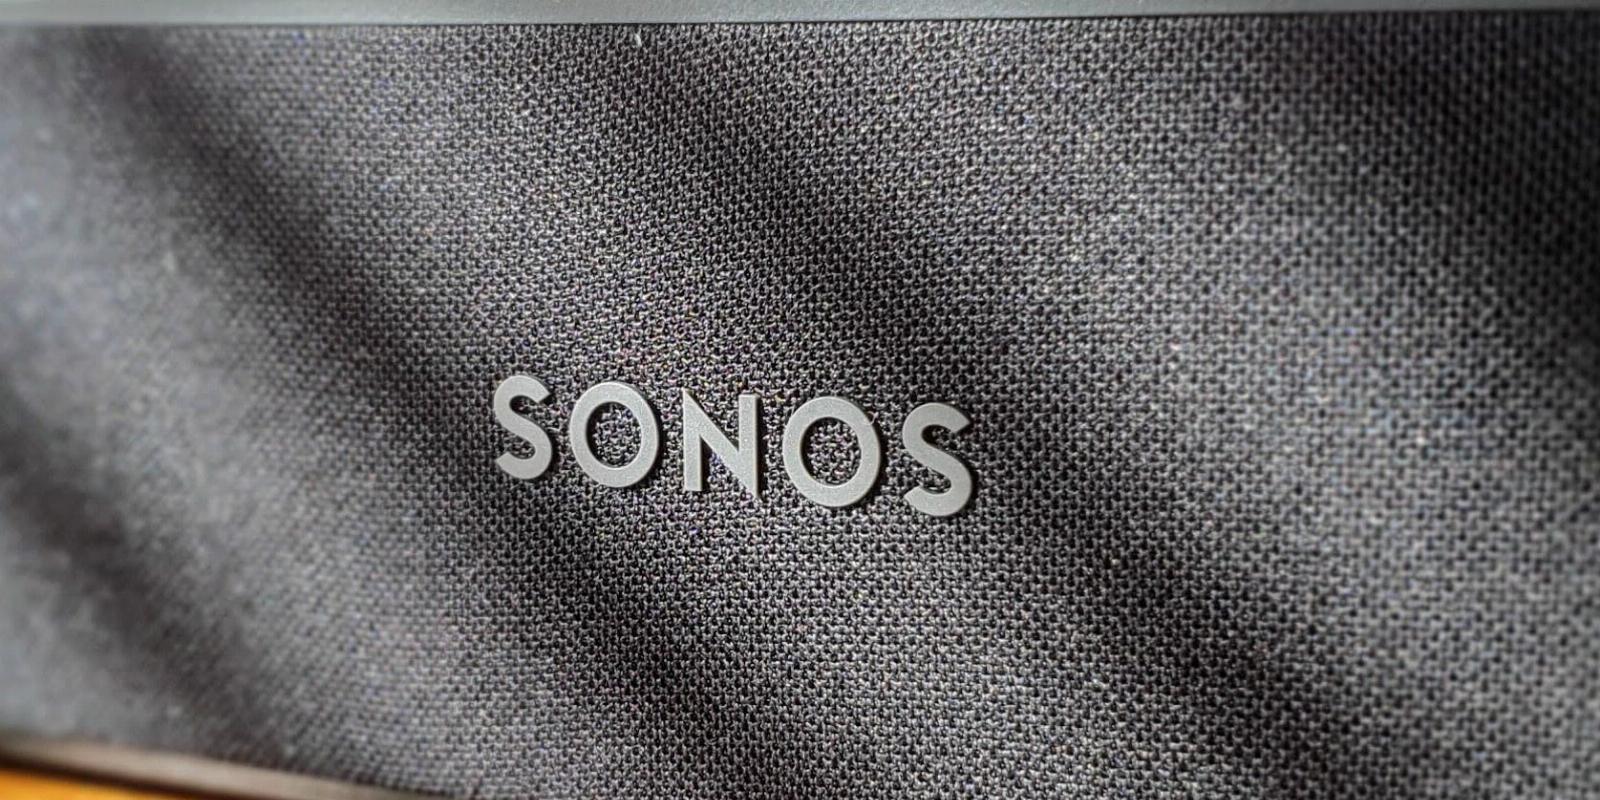 Rock On: Upcoming Sonos Speakers Will Reportedly Be Named Era 300, Era 100